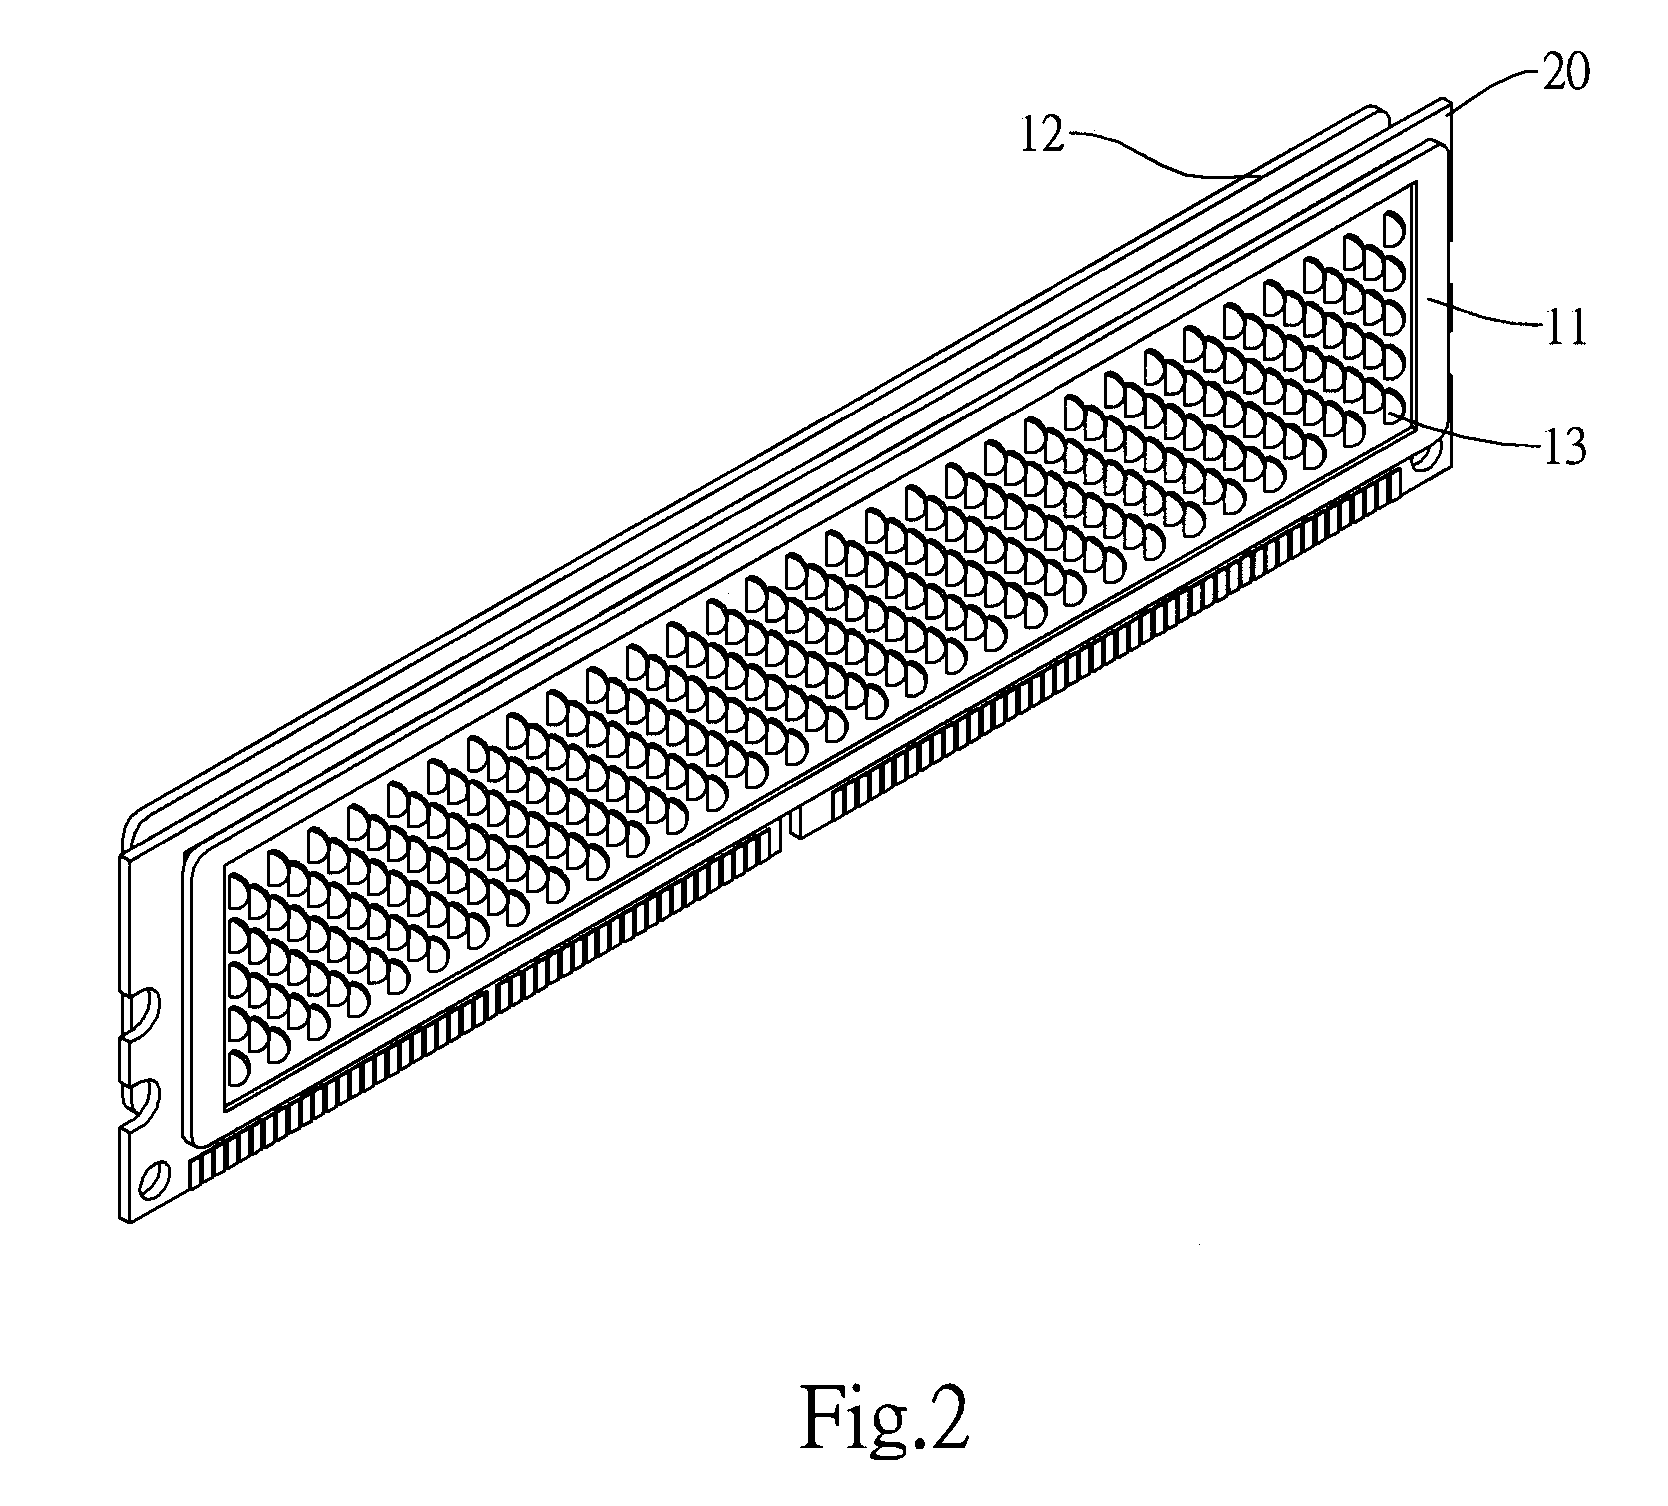 Memory heat sink device provided with a larger heat dissipating area